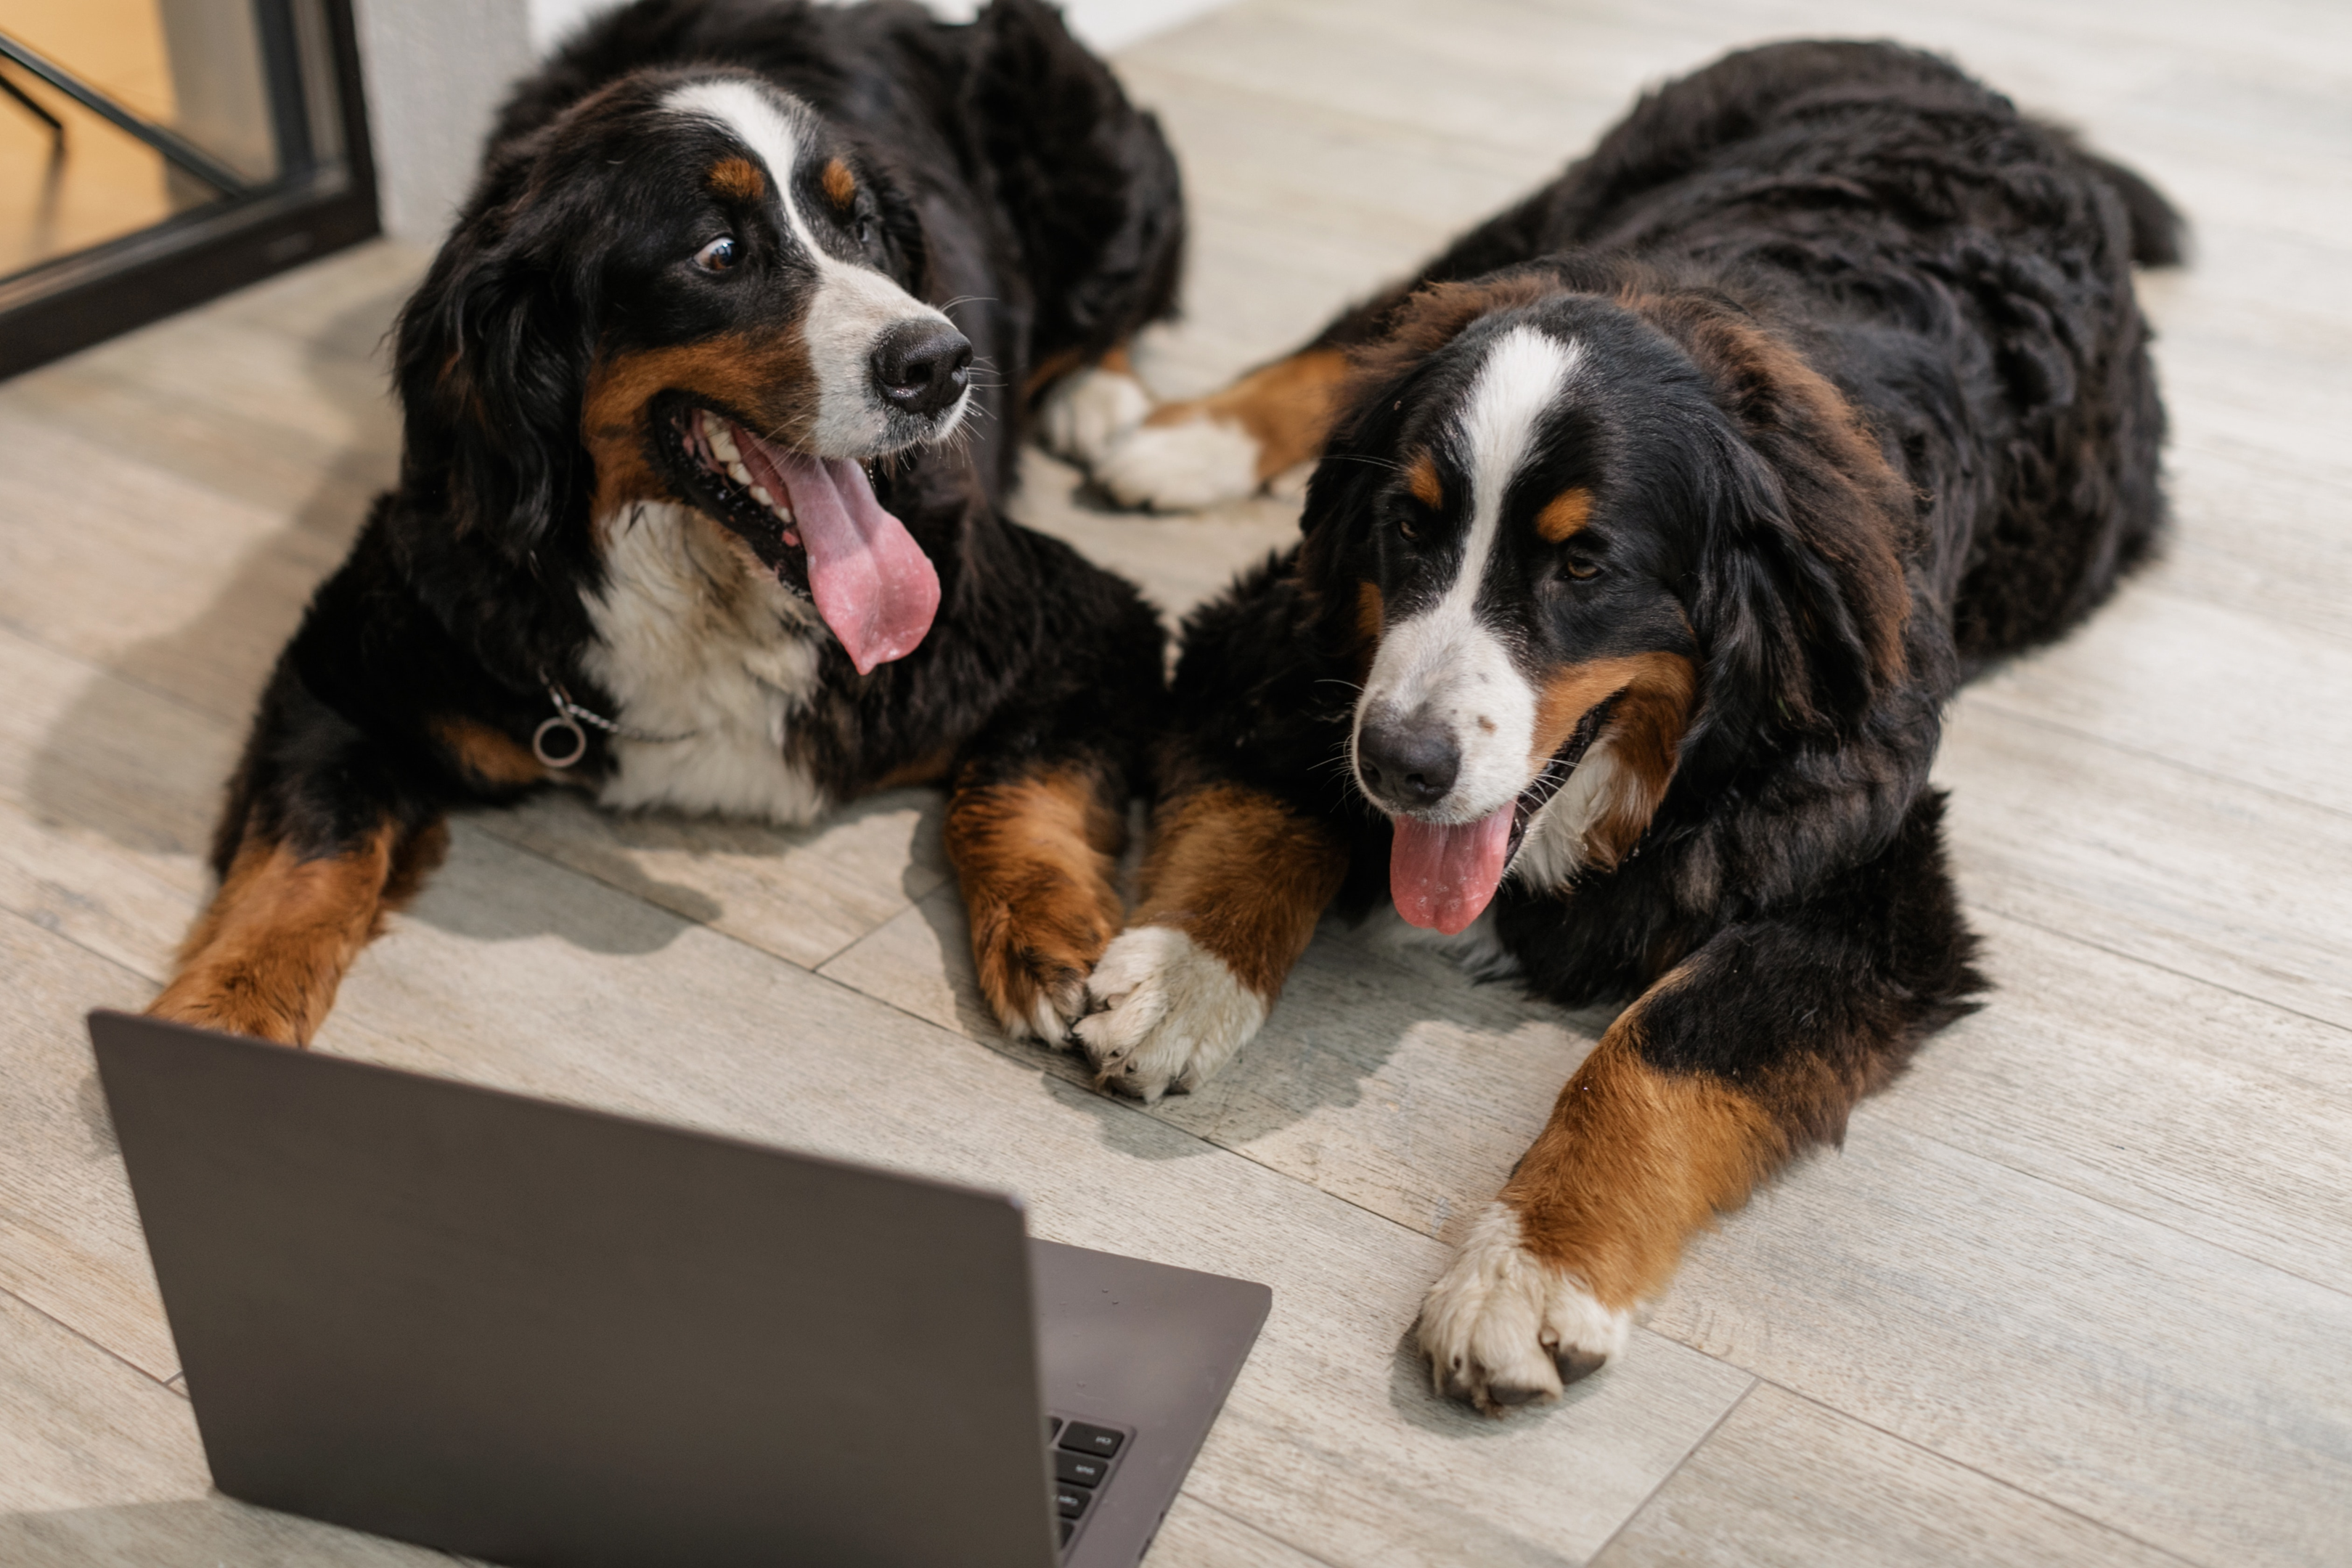 Two Bernese Mountain Dogs sitting together